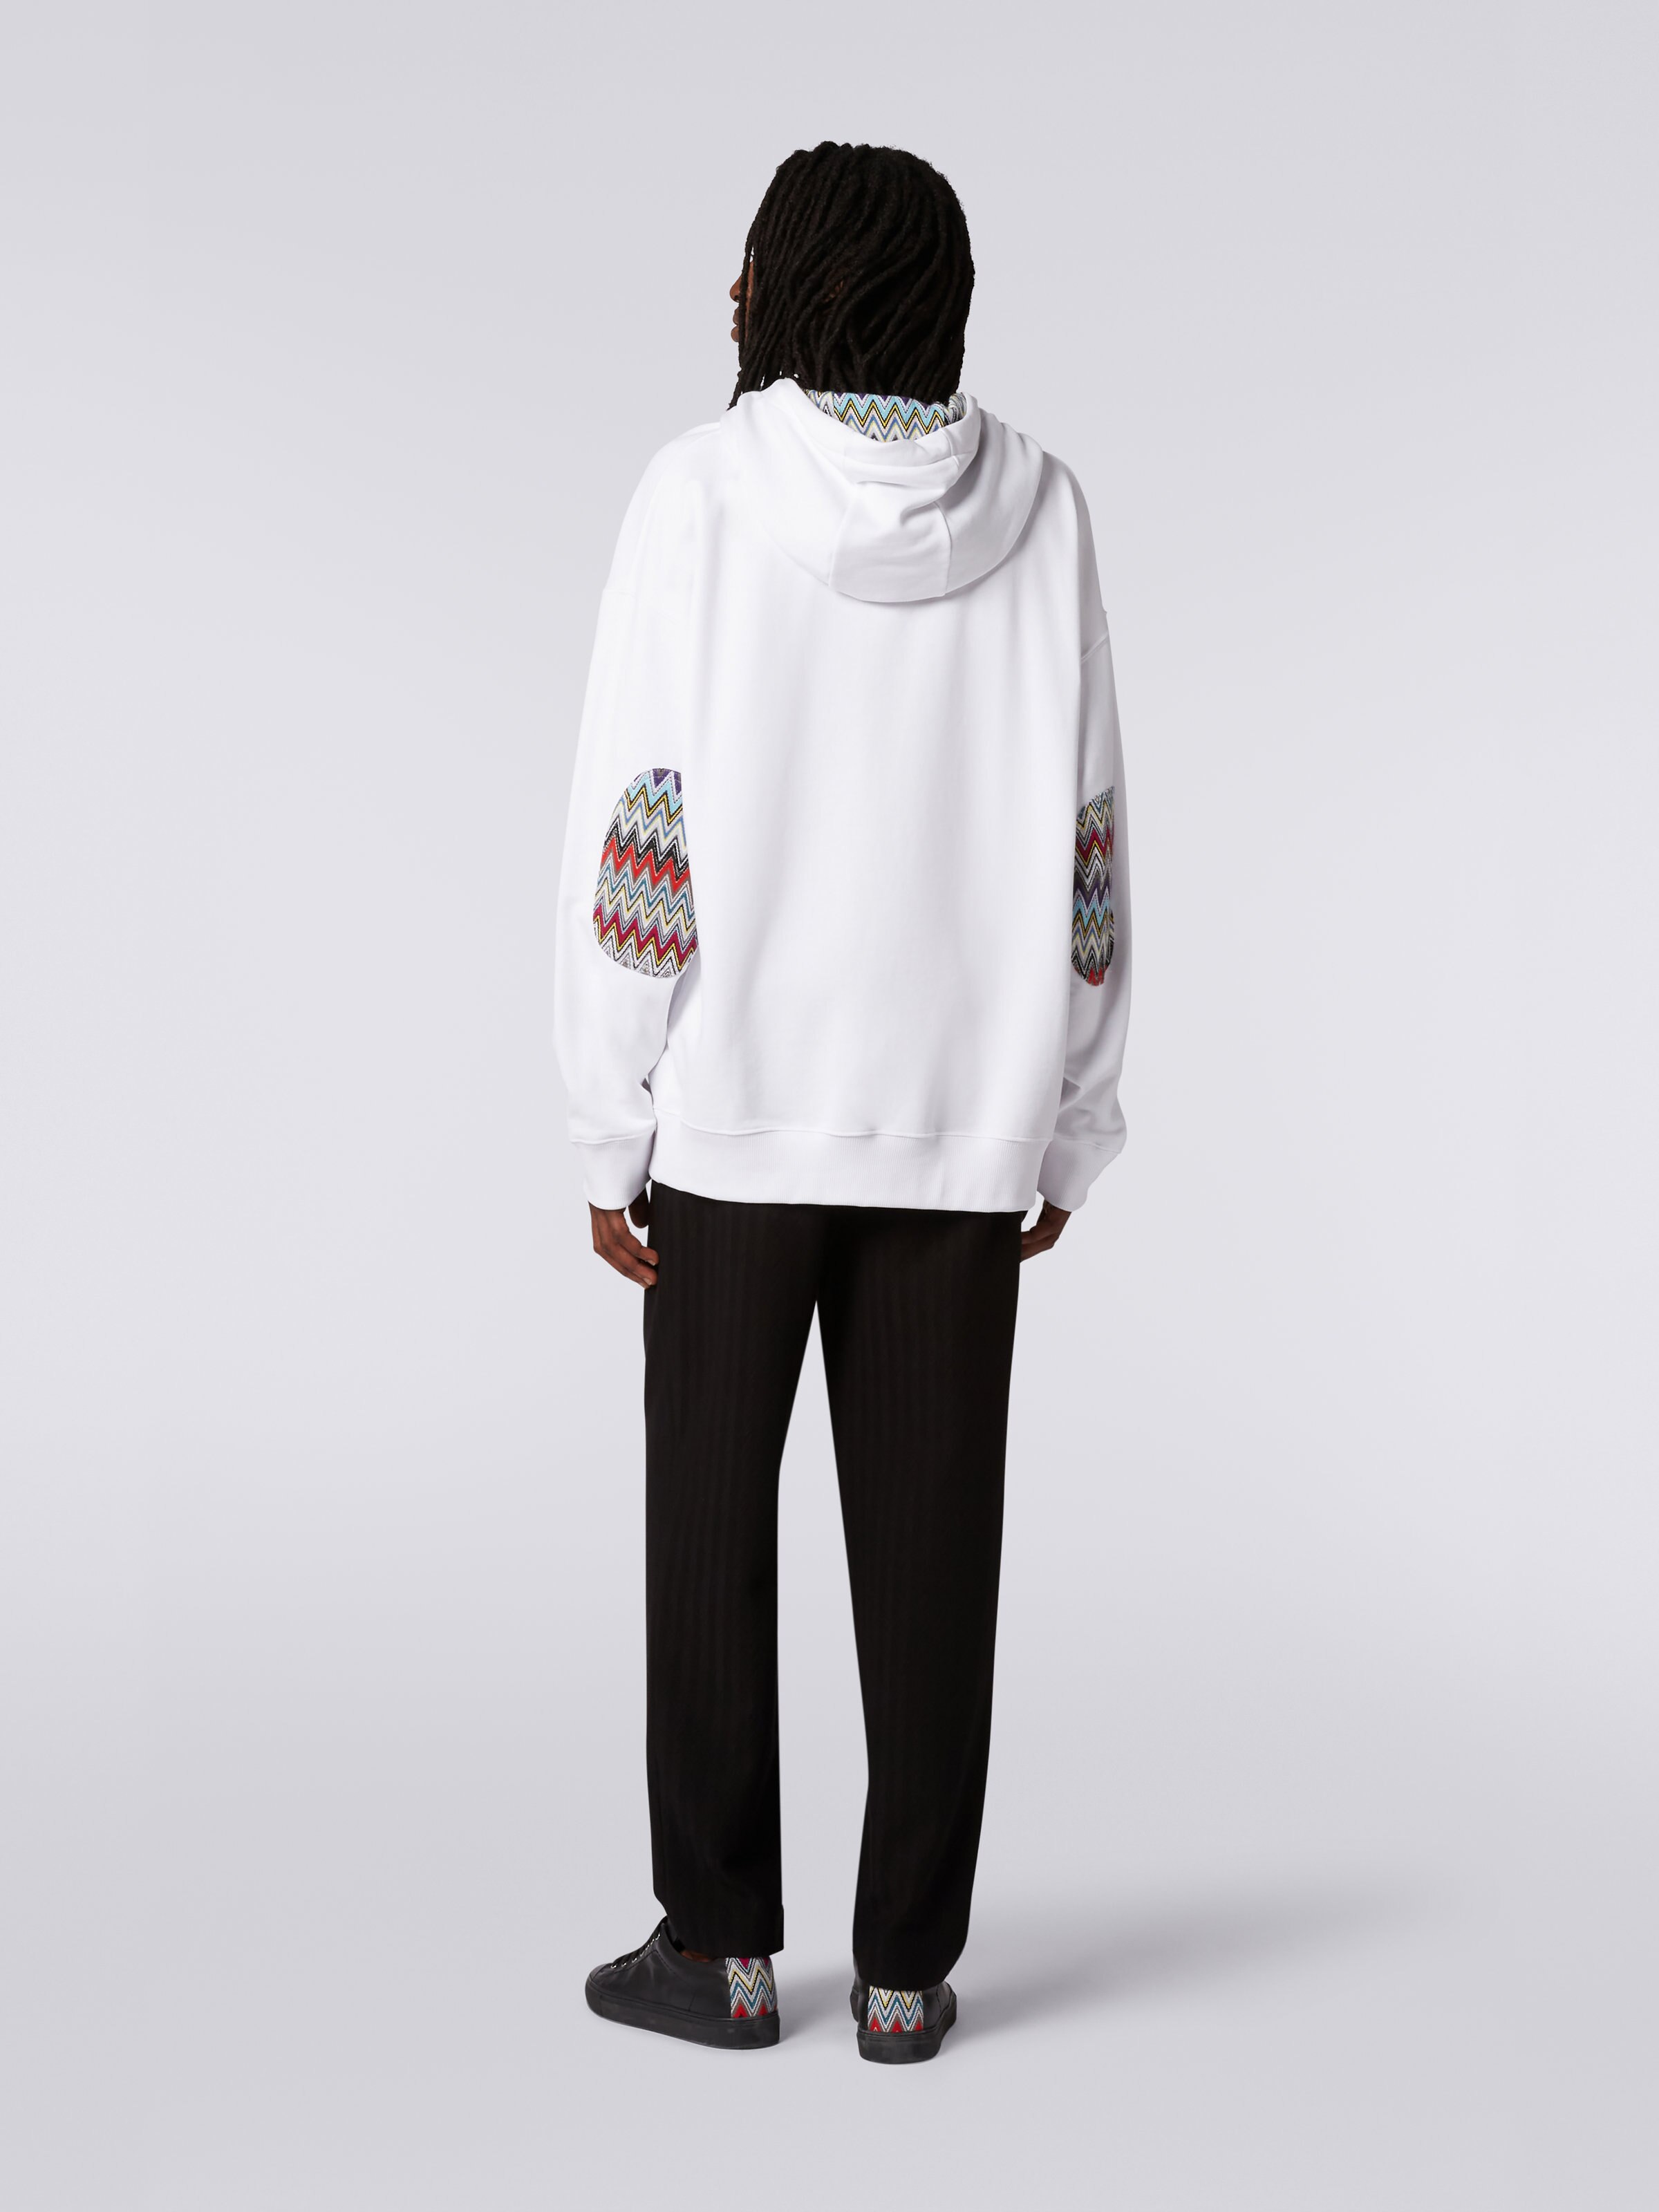 Cotton sweatshirt with hood, zip and multicoloured knitted inserts, White  - 3